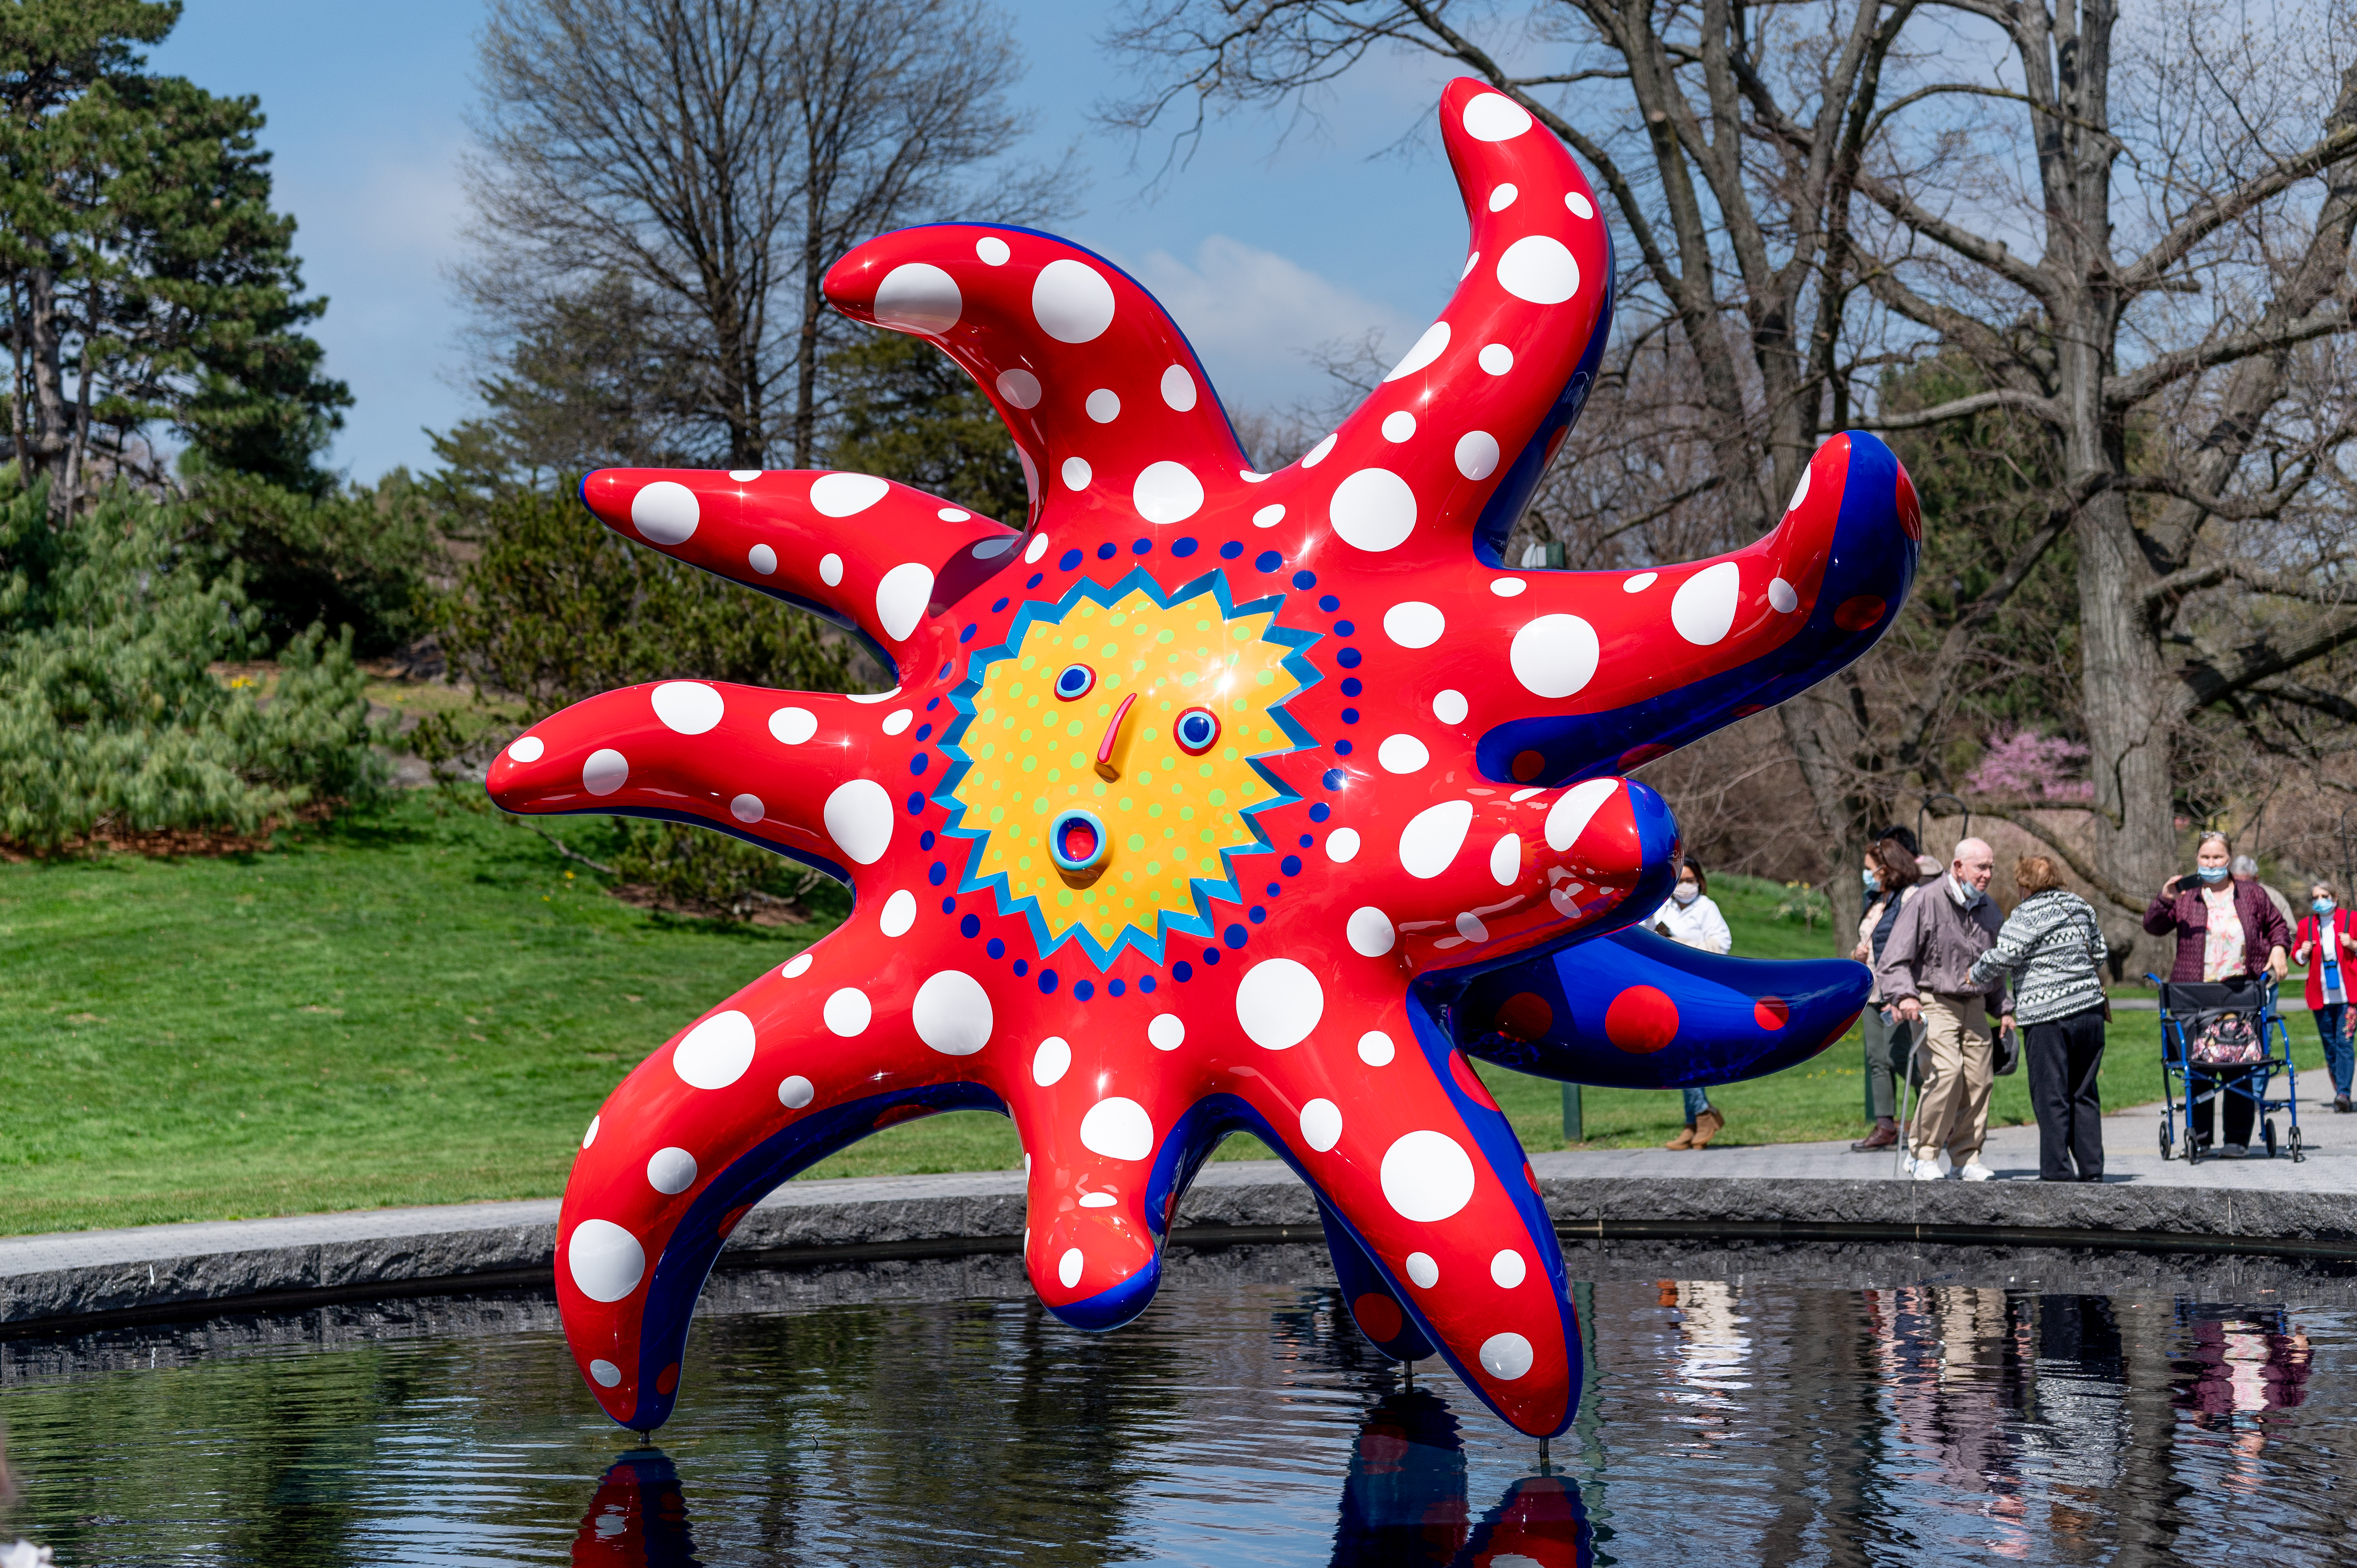 The Pumpkin sculptures by Japanese artist Yayoi Kusama are on News  Photo - Getty Images